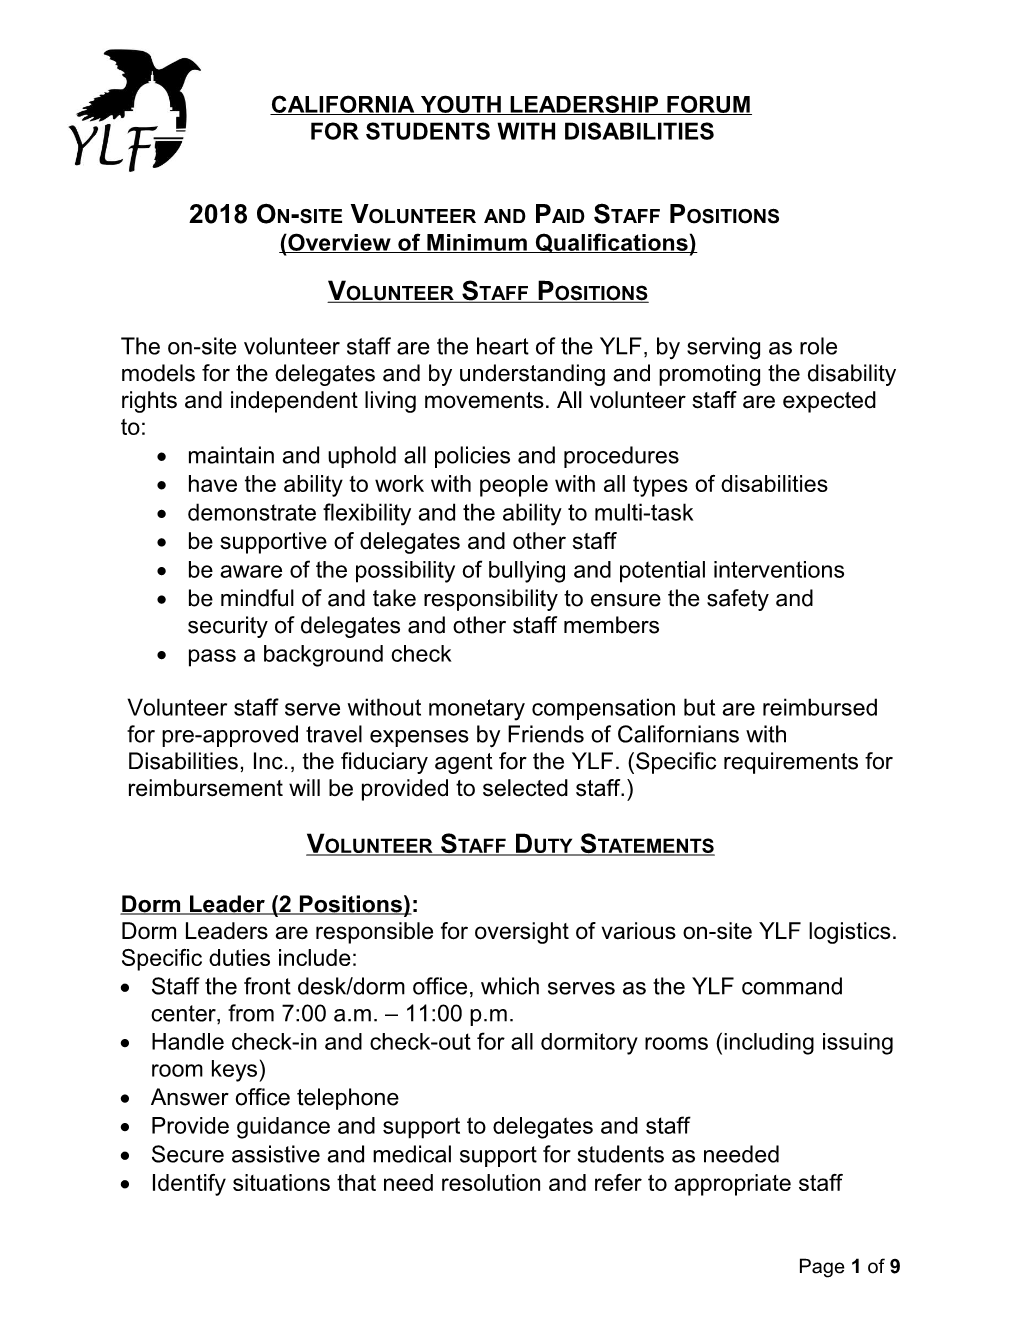 2018On-Site Volunteer and Paid Staff Positions